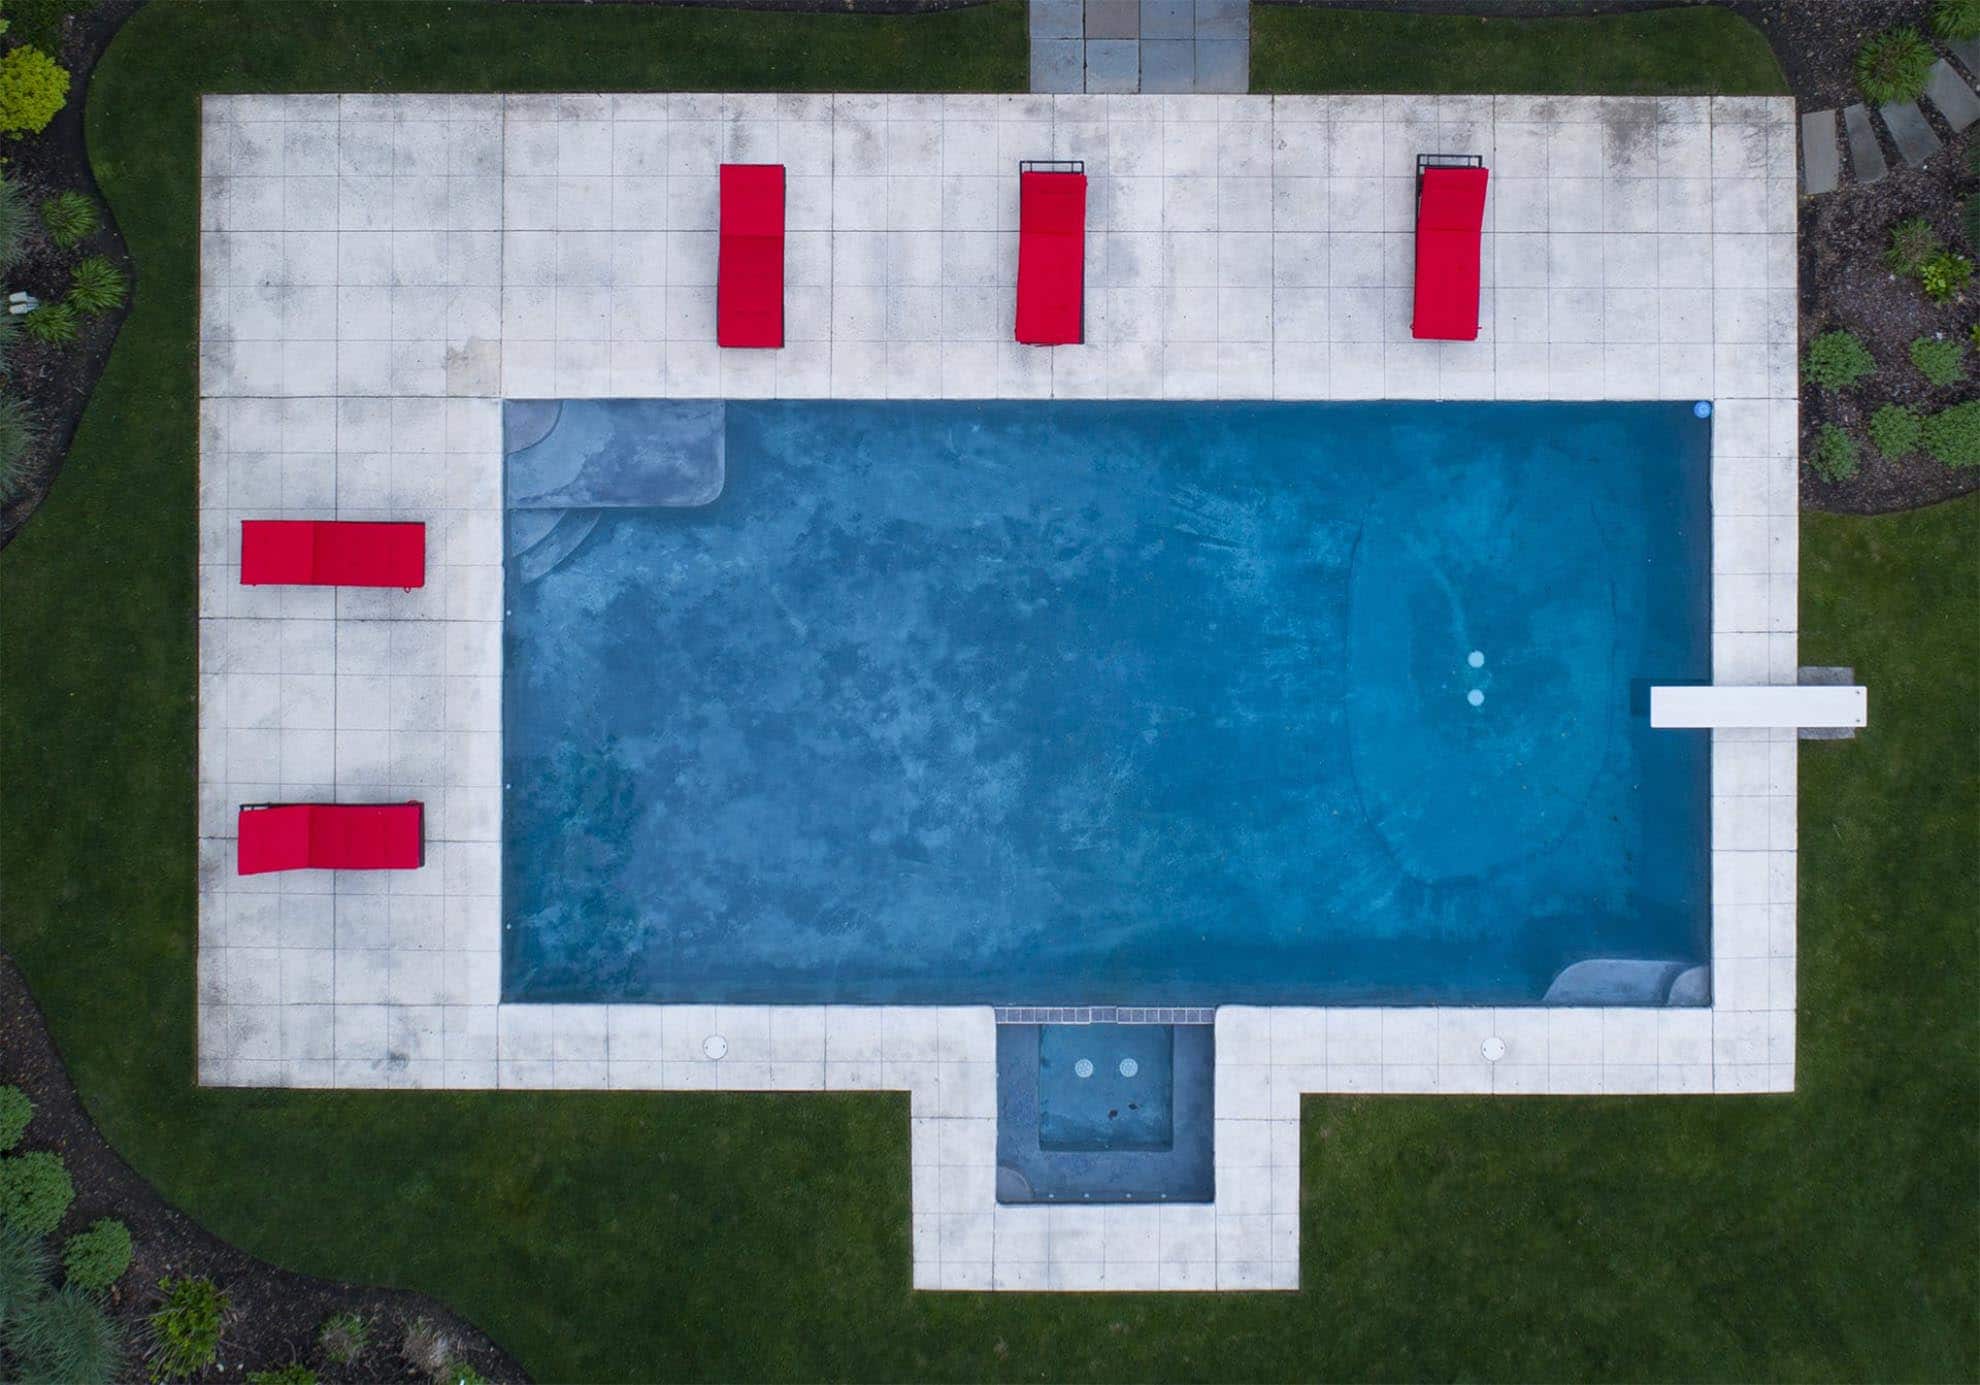 Drone photograph of birds eye view of Blue swimming pool with red chairs